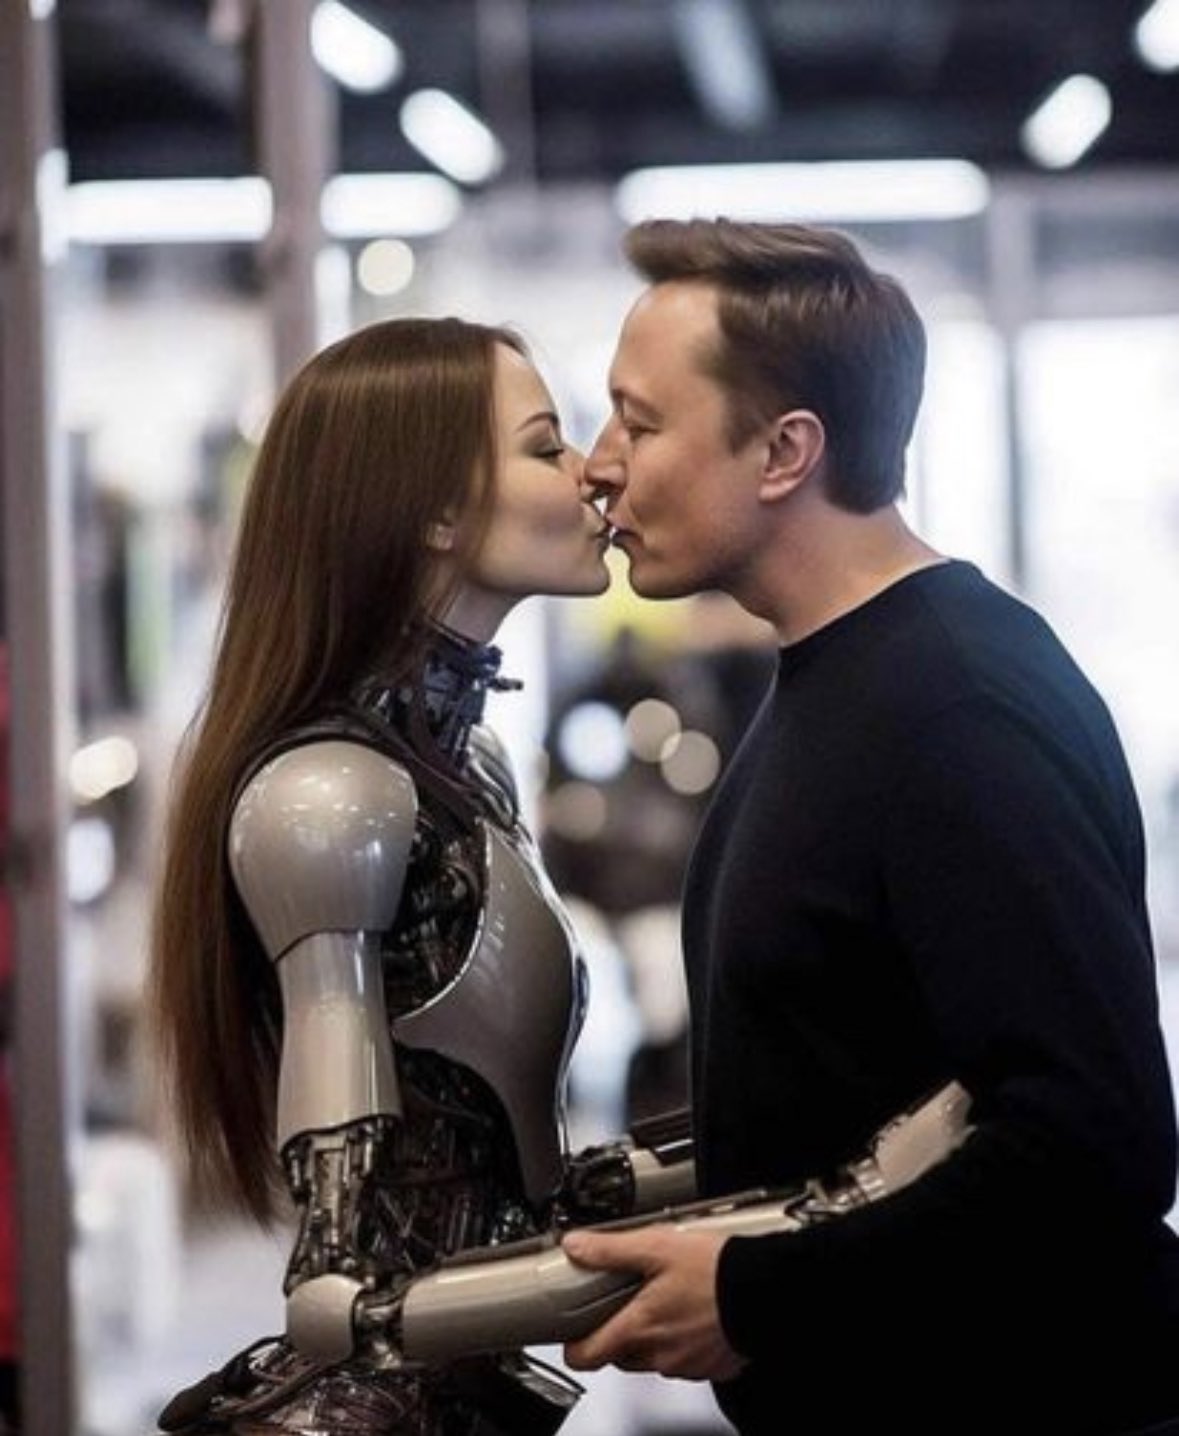 There Are Currently No Truly AI Robot Sex Dolls On The Market